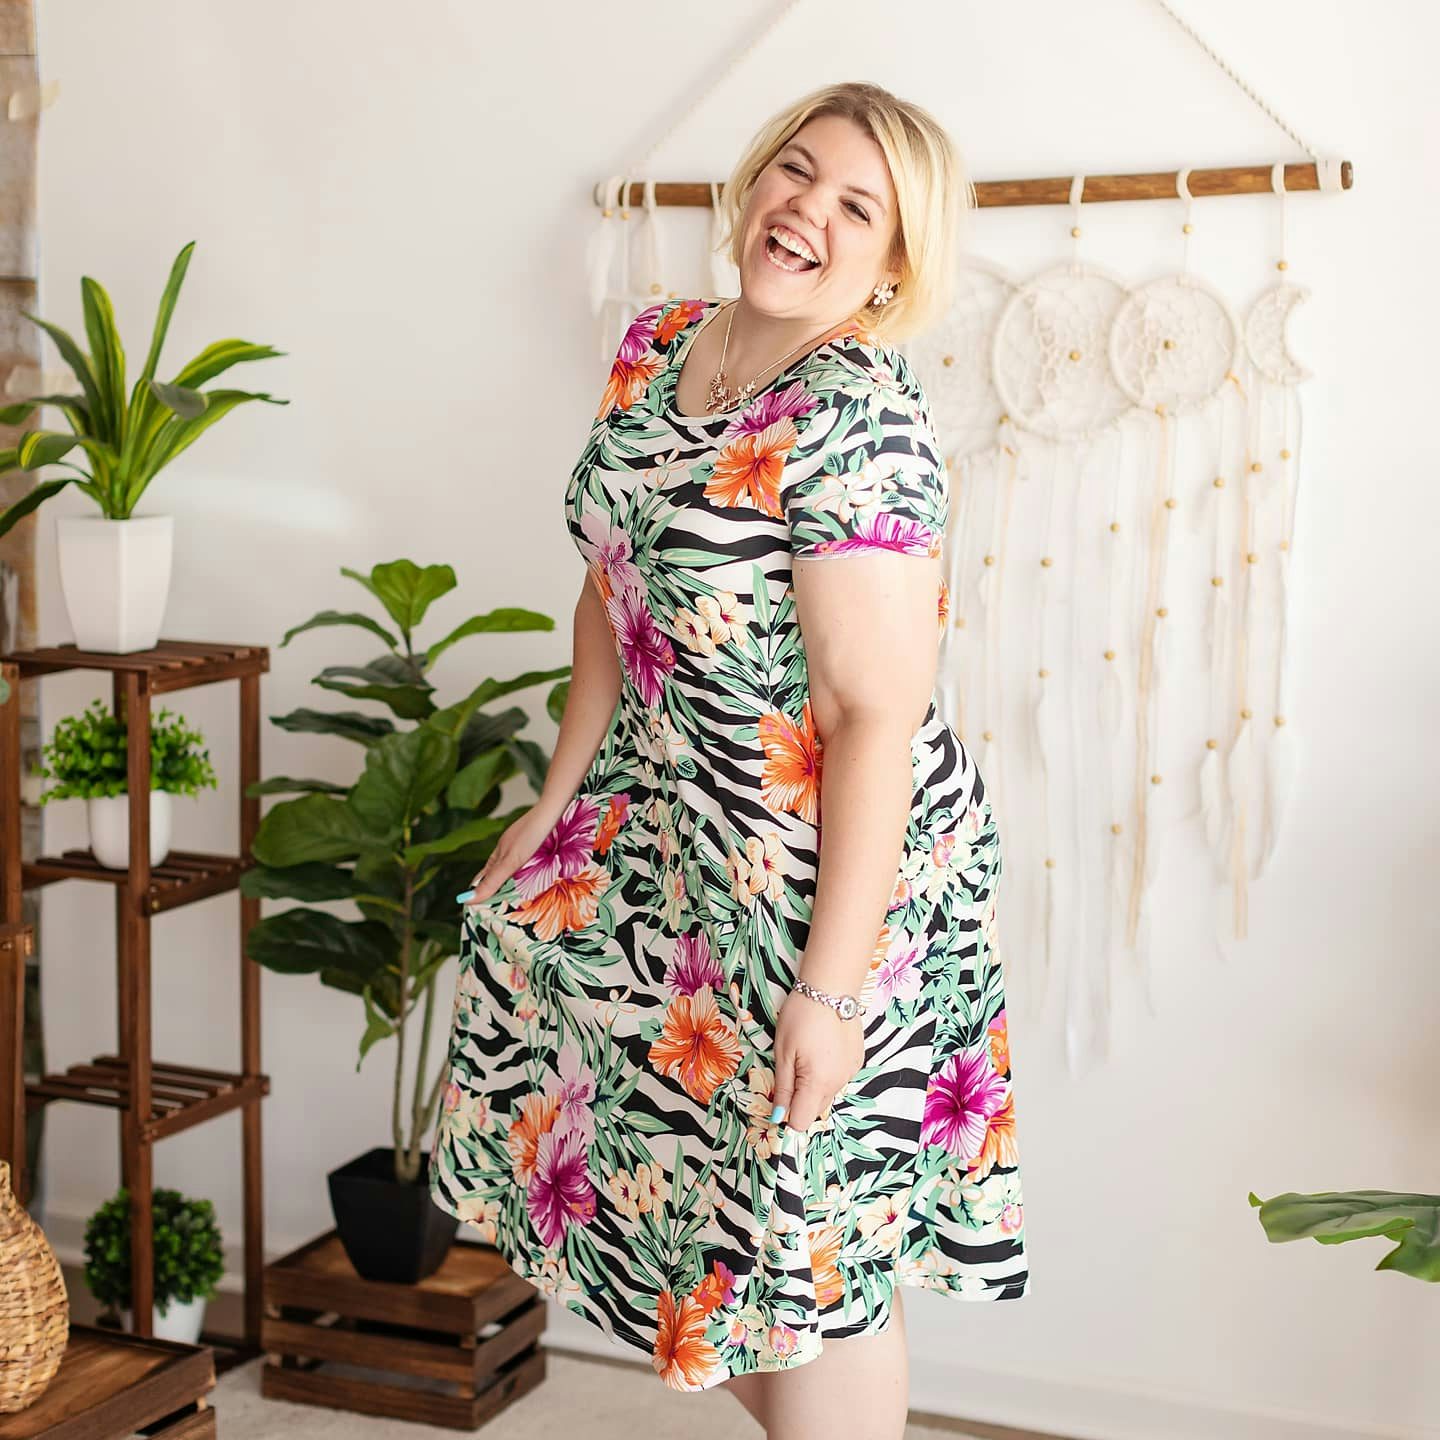 Erin Pifer posing for a photo in a colorful dress in front of plants and wall decoration